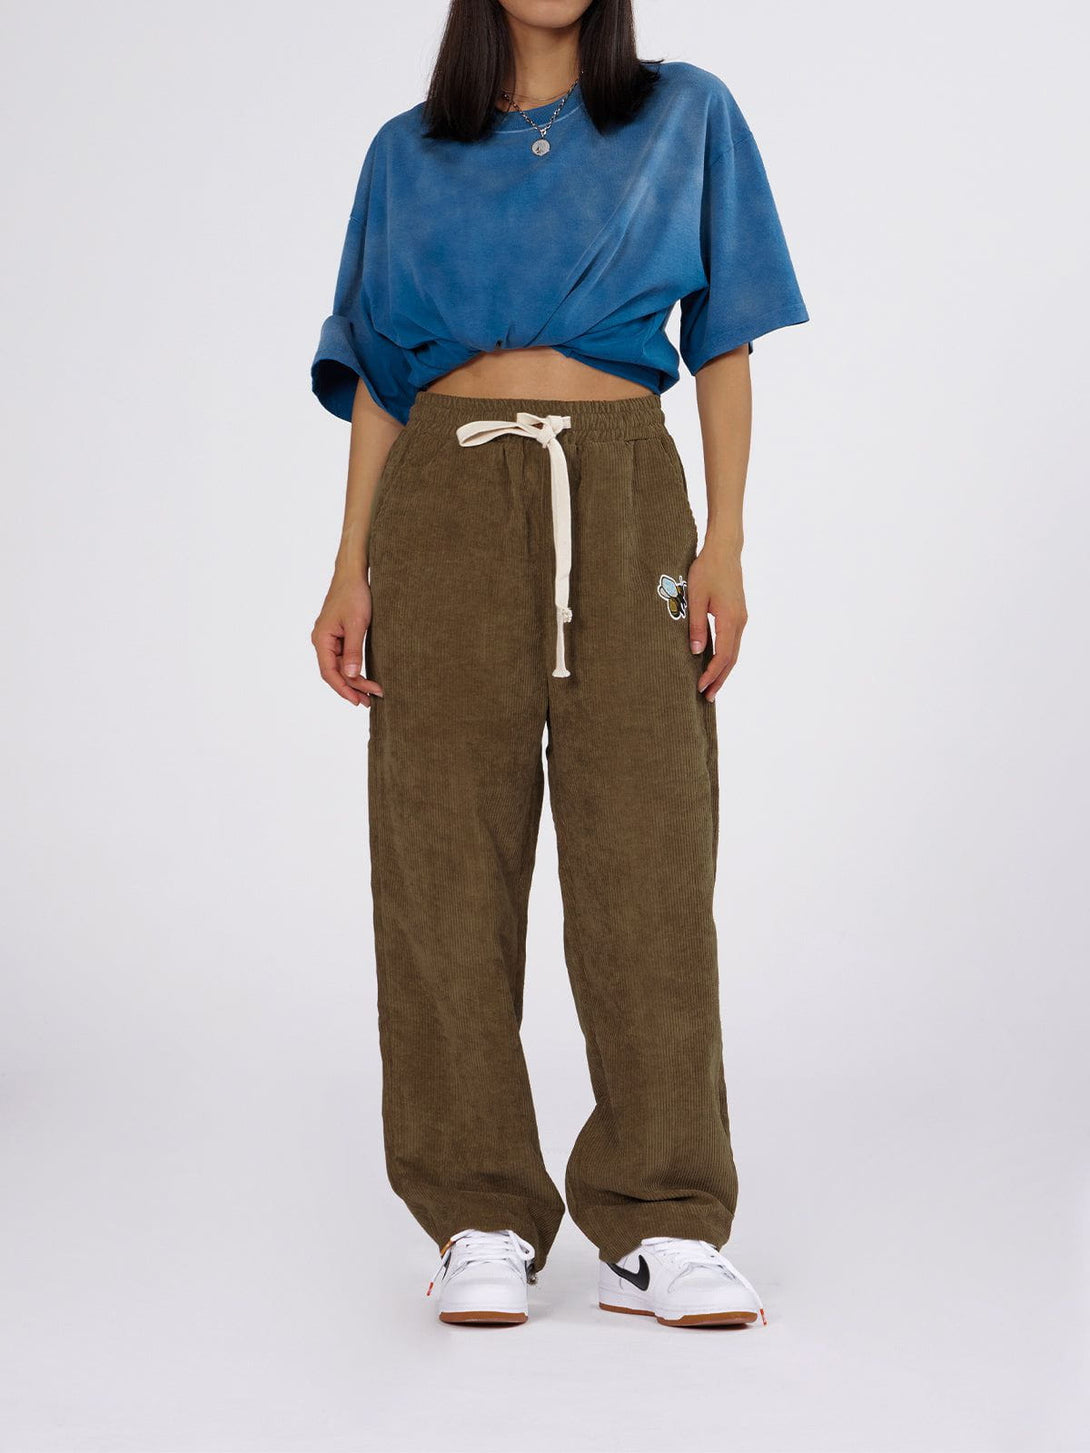 Levefly - Bee Embroidered Corduroy Pants - Streetwear Fashion - levefly.com